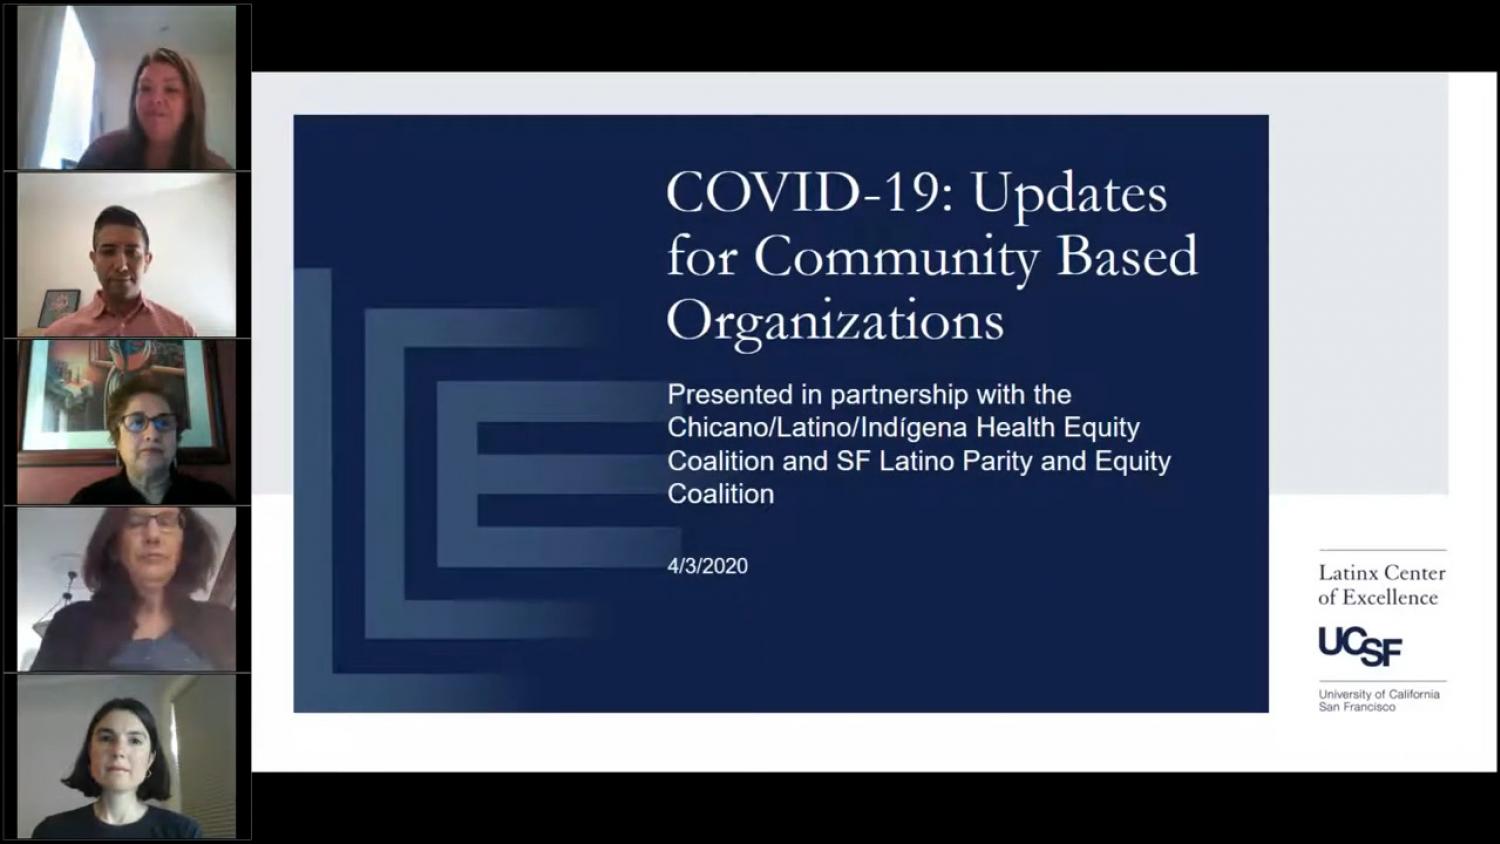 Screenshot of an online Facebook Live presentation provided by the LCOE for Community Based Organizations.